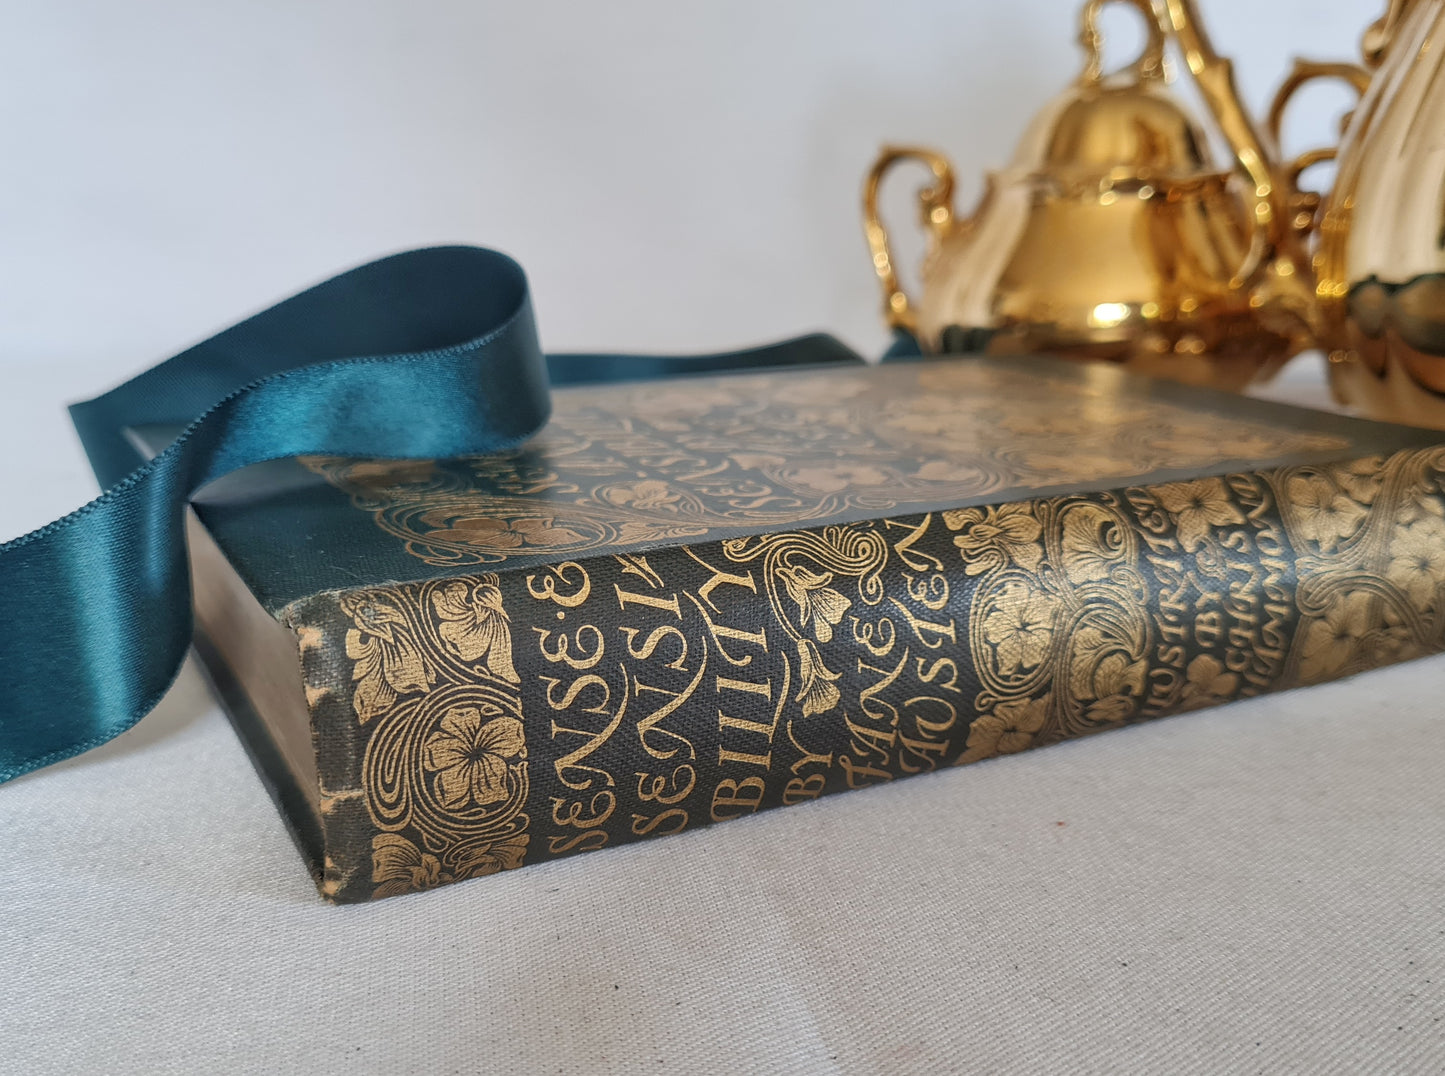 1899 Sense and Sensibility by Jane Austen / 1st Edition Thus, G Allen London / Highly Sought After Decorative Antique Edition / Illustrated